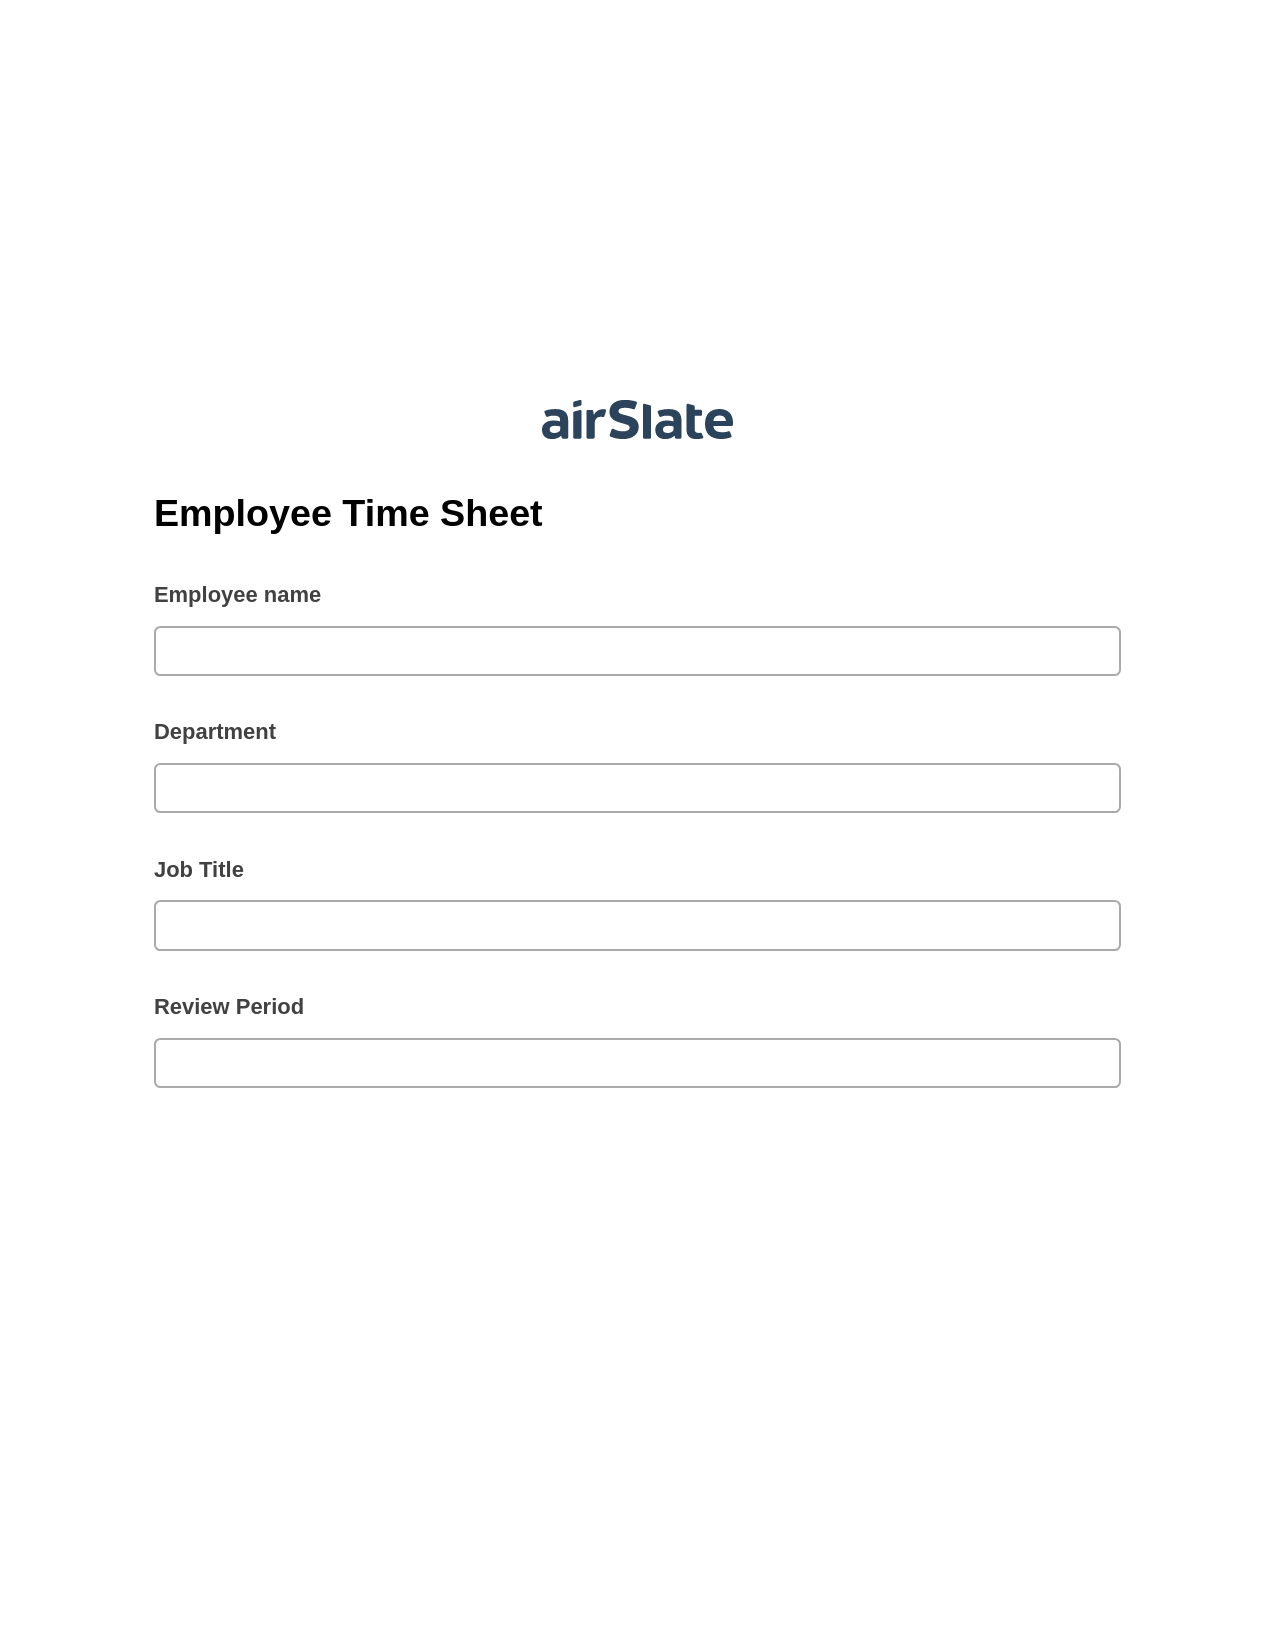 Employee Time Sheet Pre-fill Dropdowns from Excel Bot, Create slate addon, Export to Excel 365 Bot